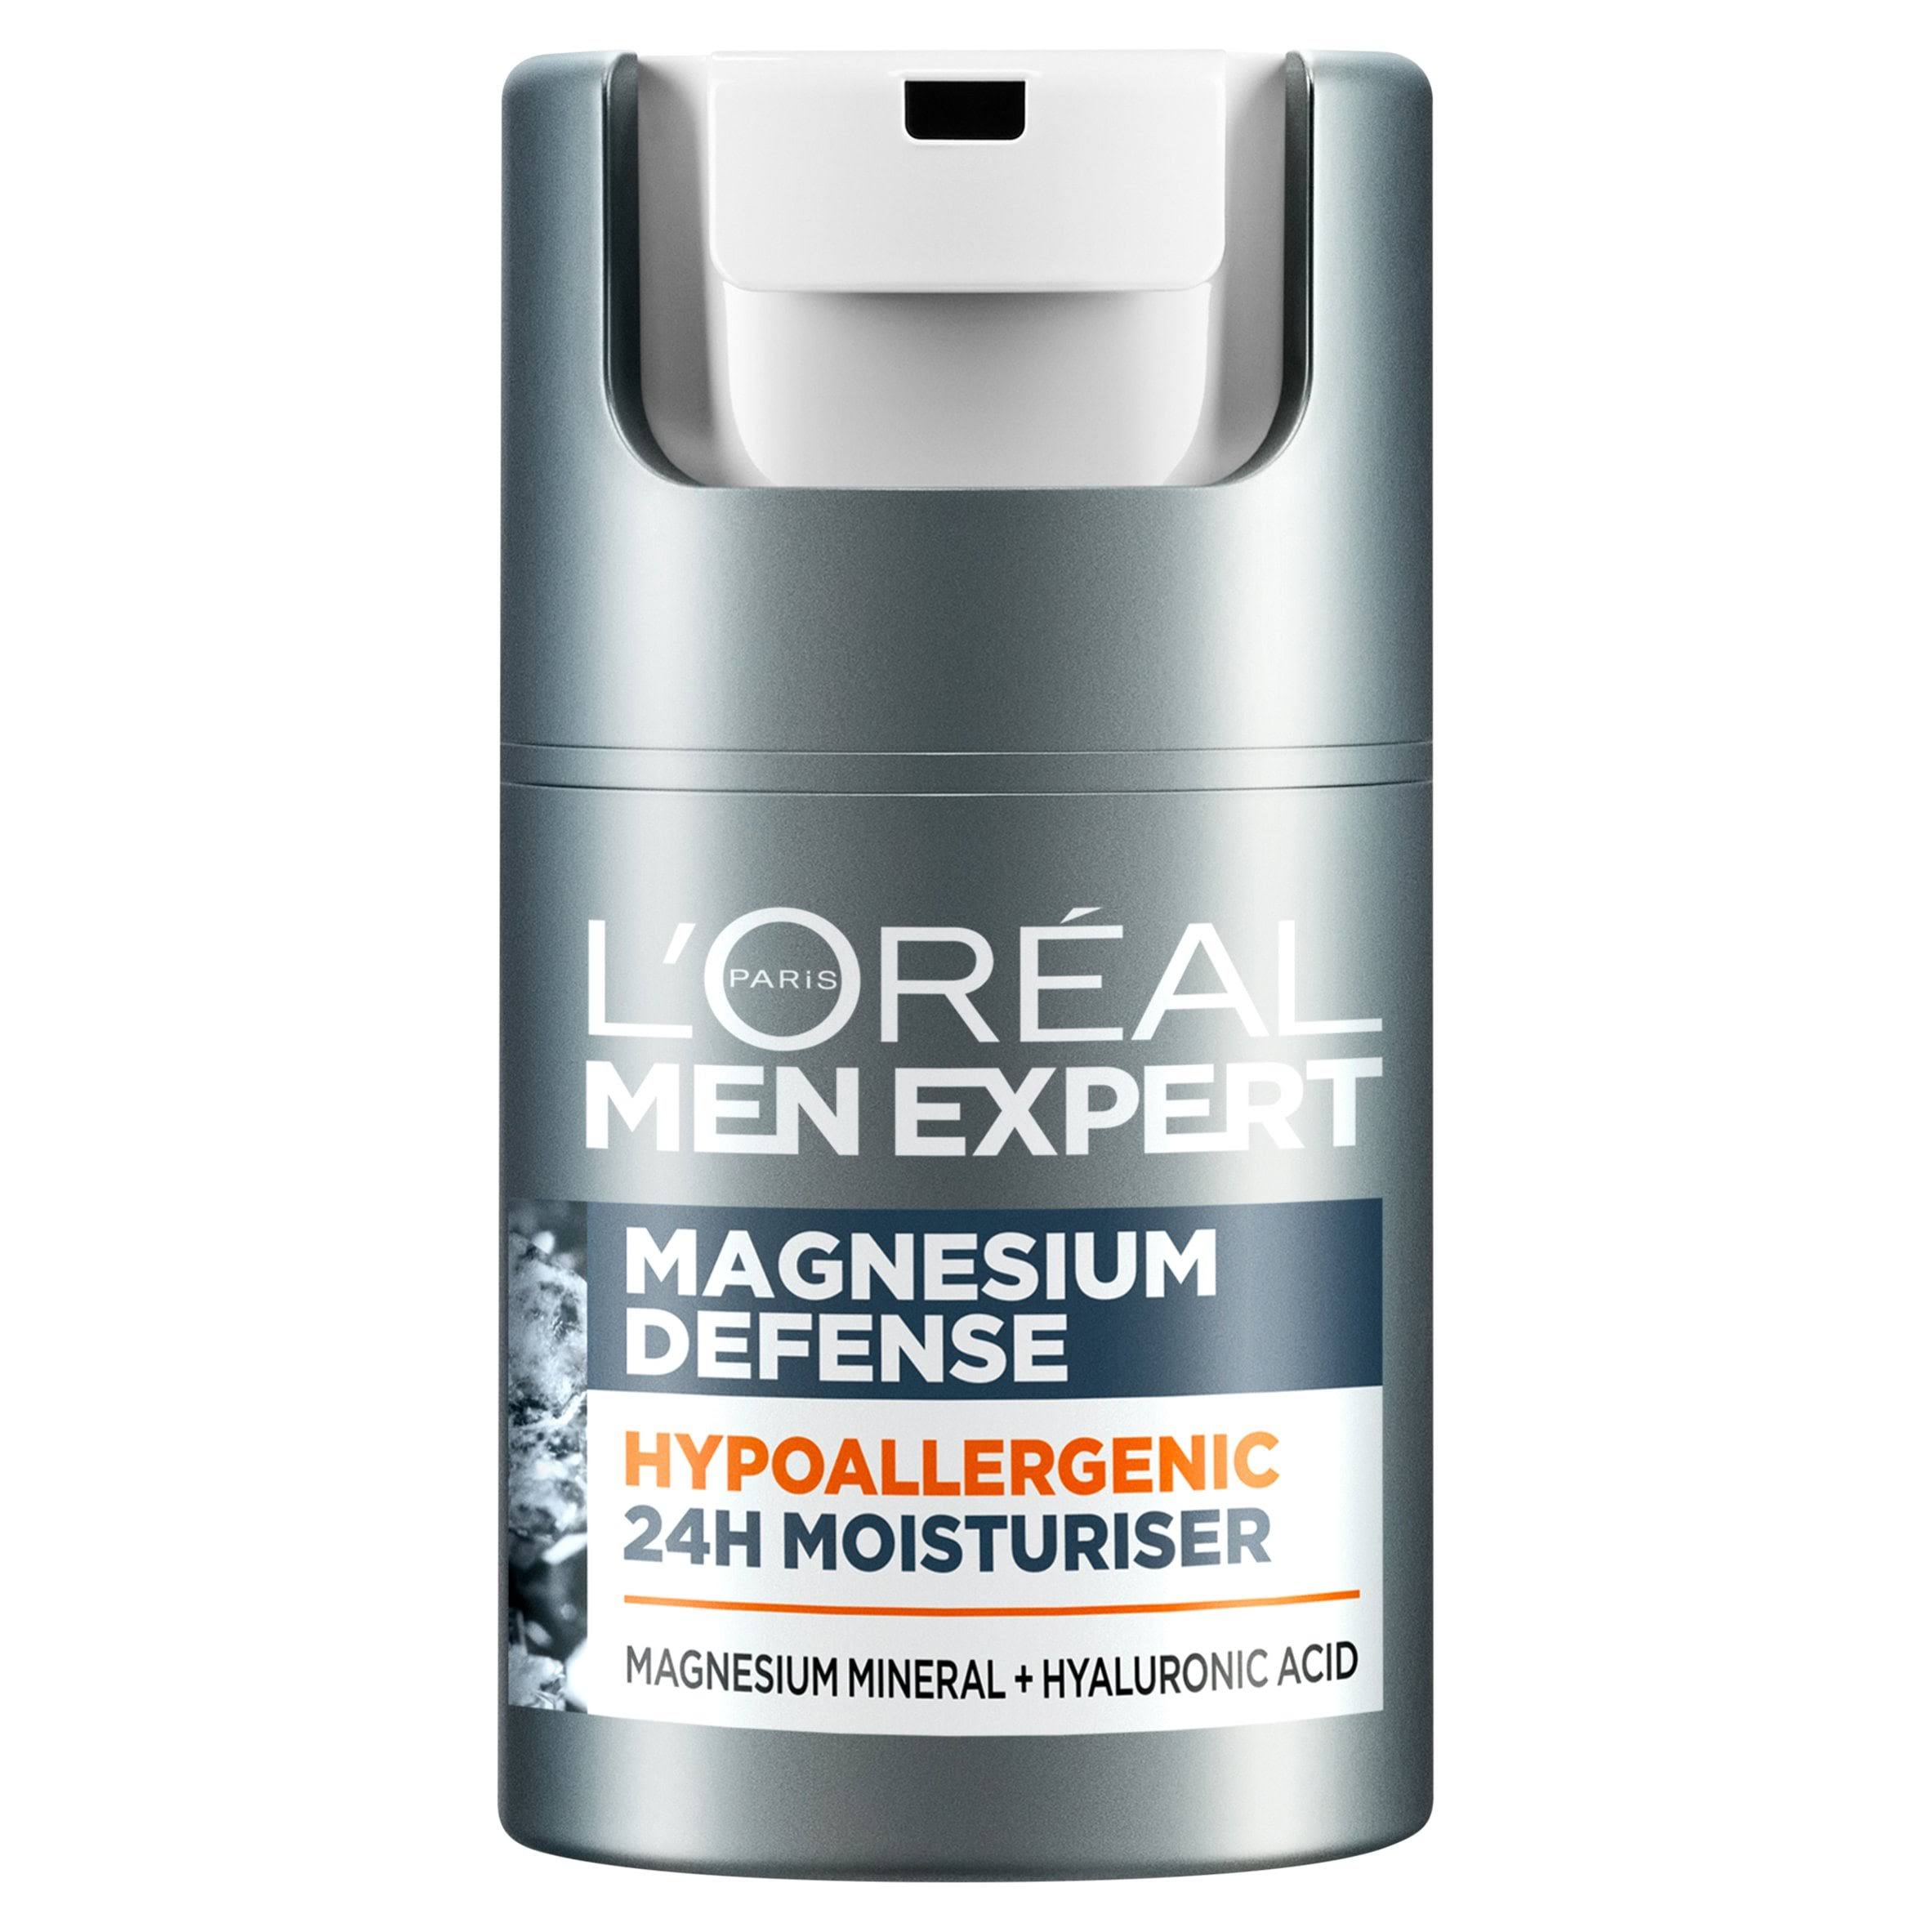 L'Oreal Men Expert Sensitive Skin Moisturiser, Magnesium Defence, Hypoallergenic 24H Daily Mens Moisturiser, With Magnesium Mineral And Hyaluronic ...